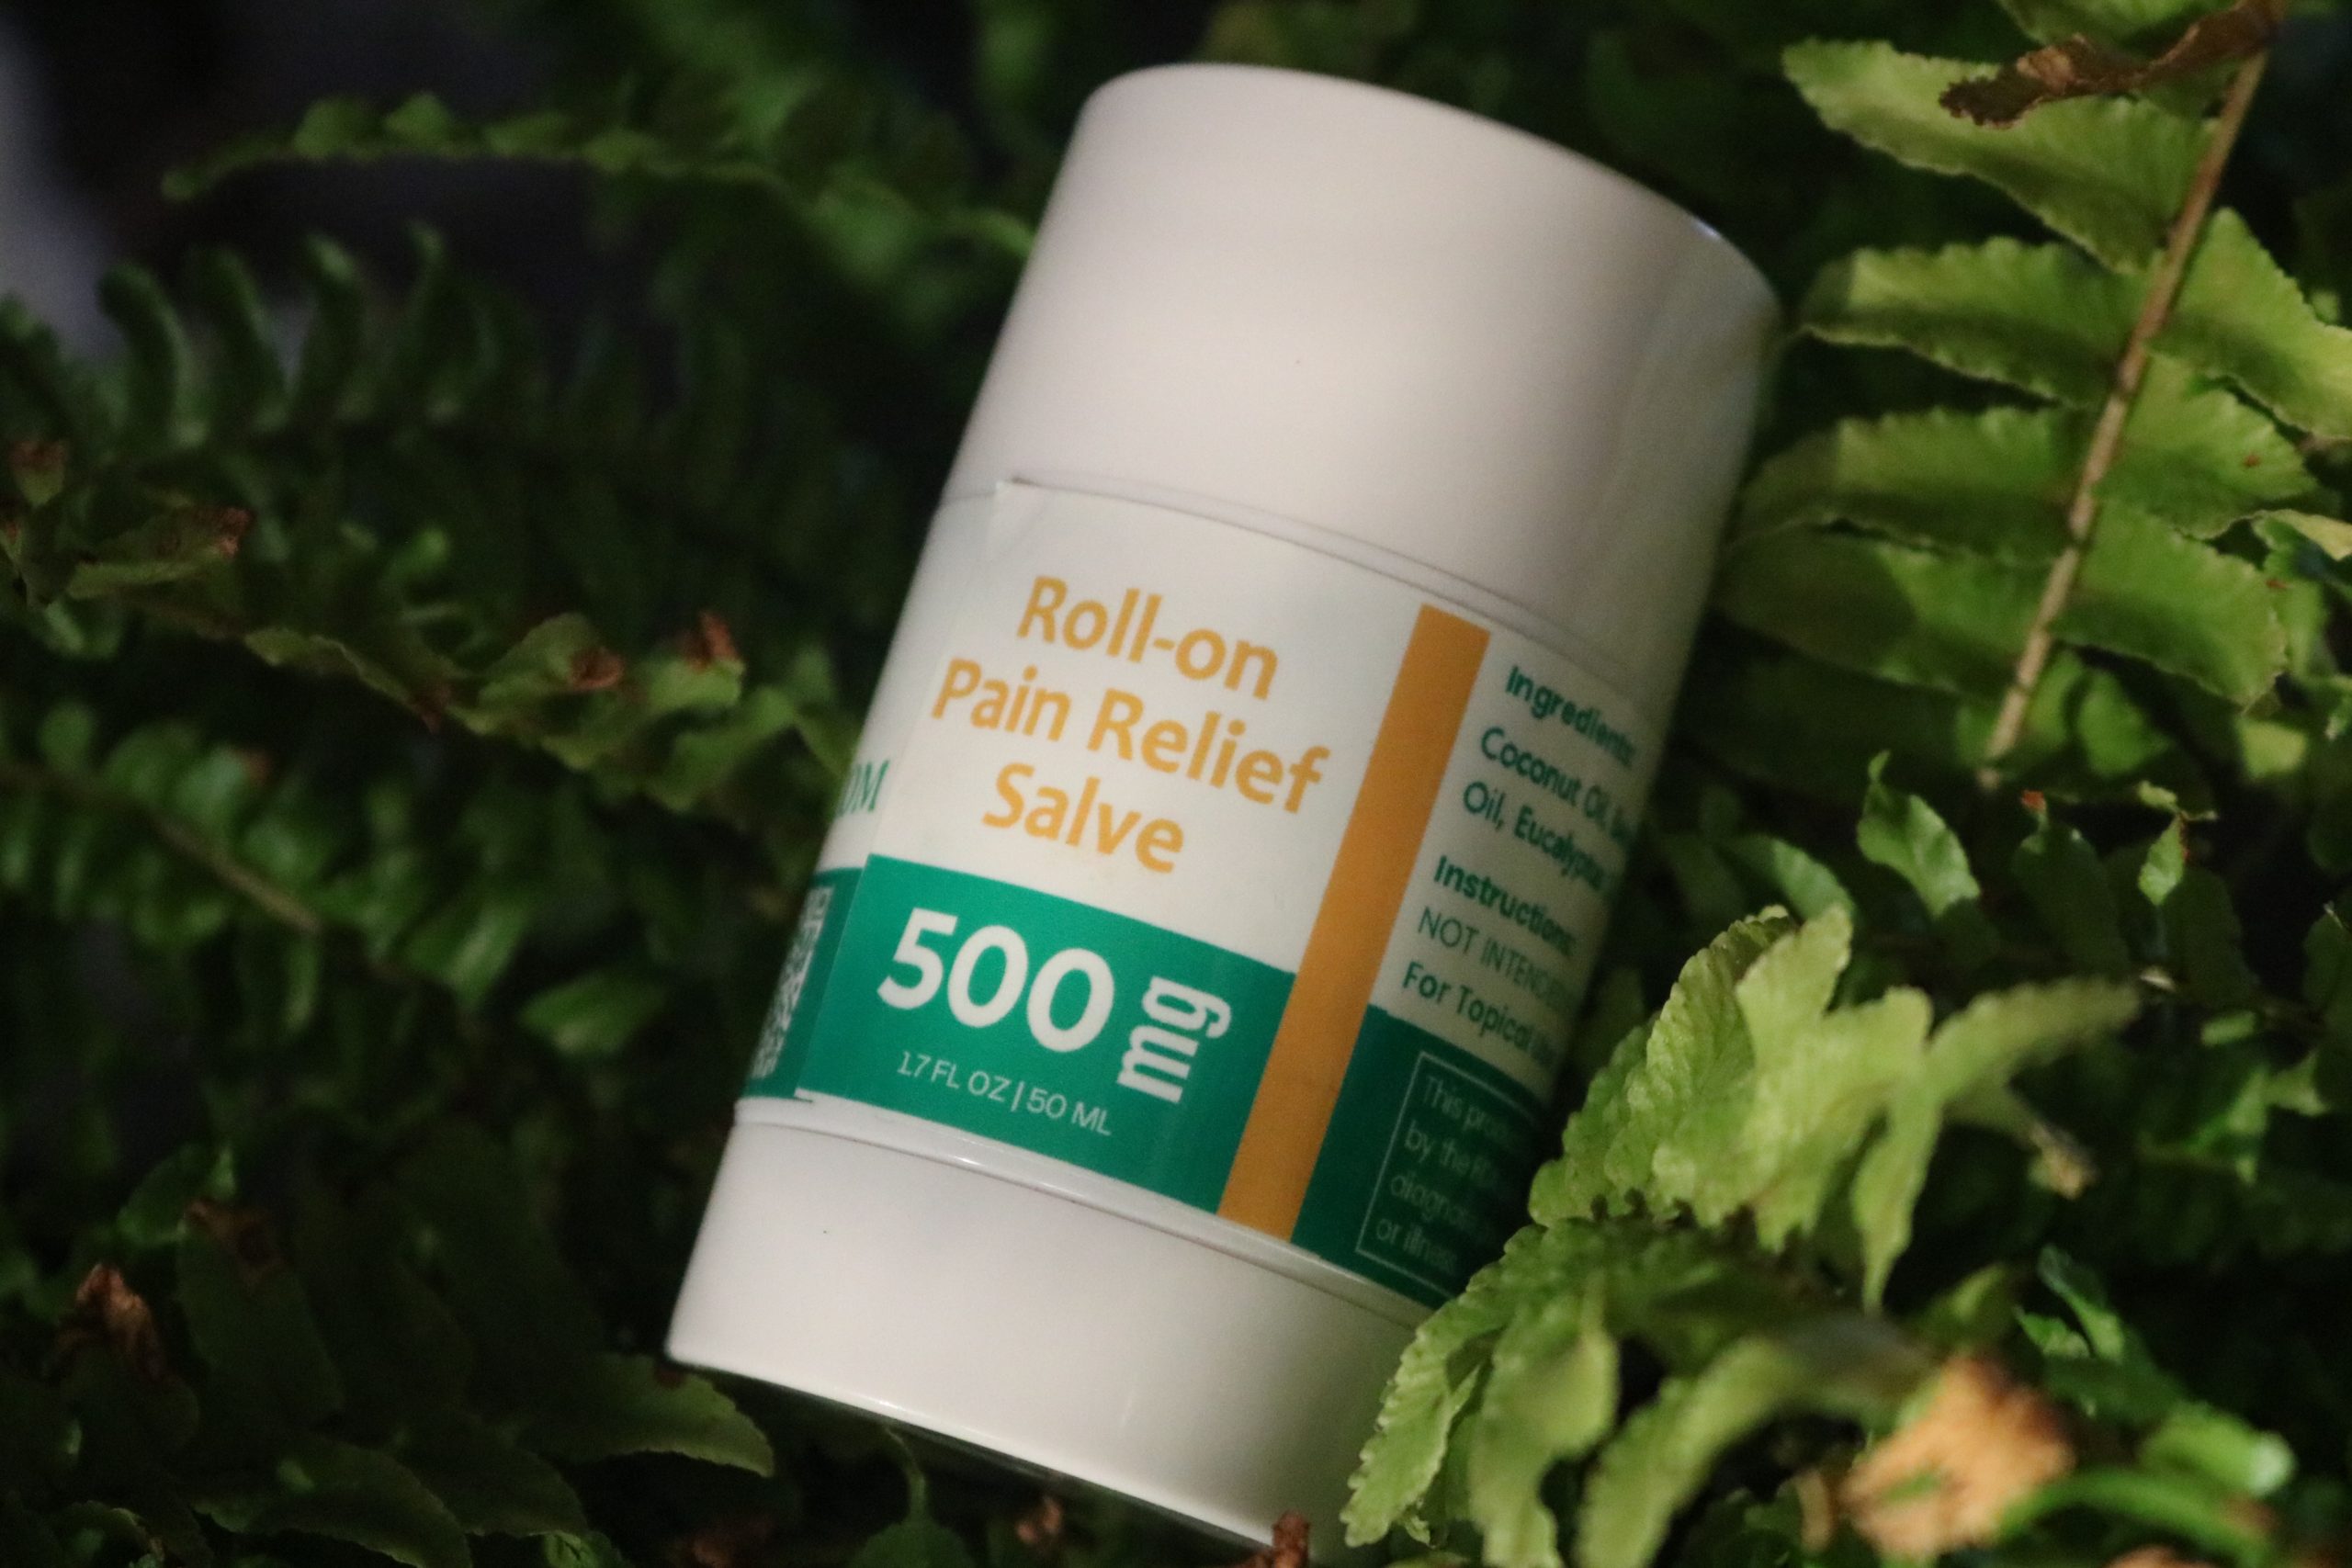 Roll-on Pain Relief Salve – 500 mg